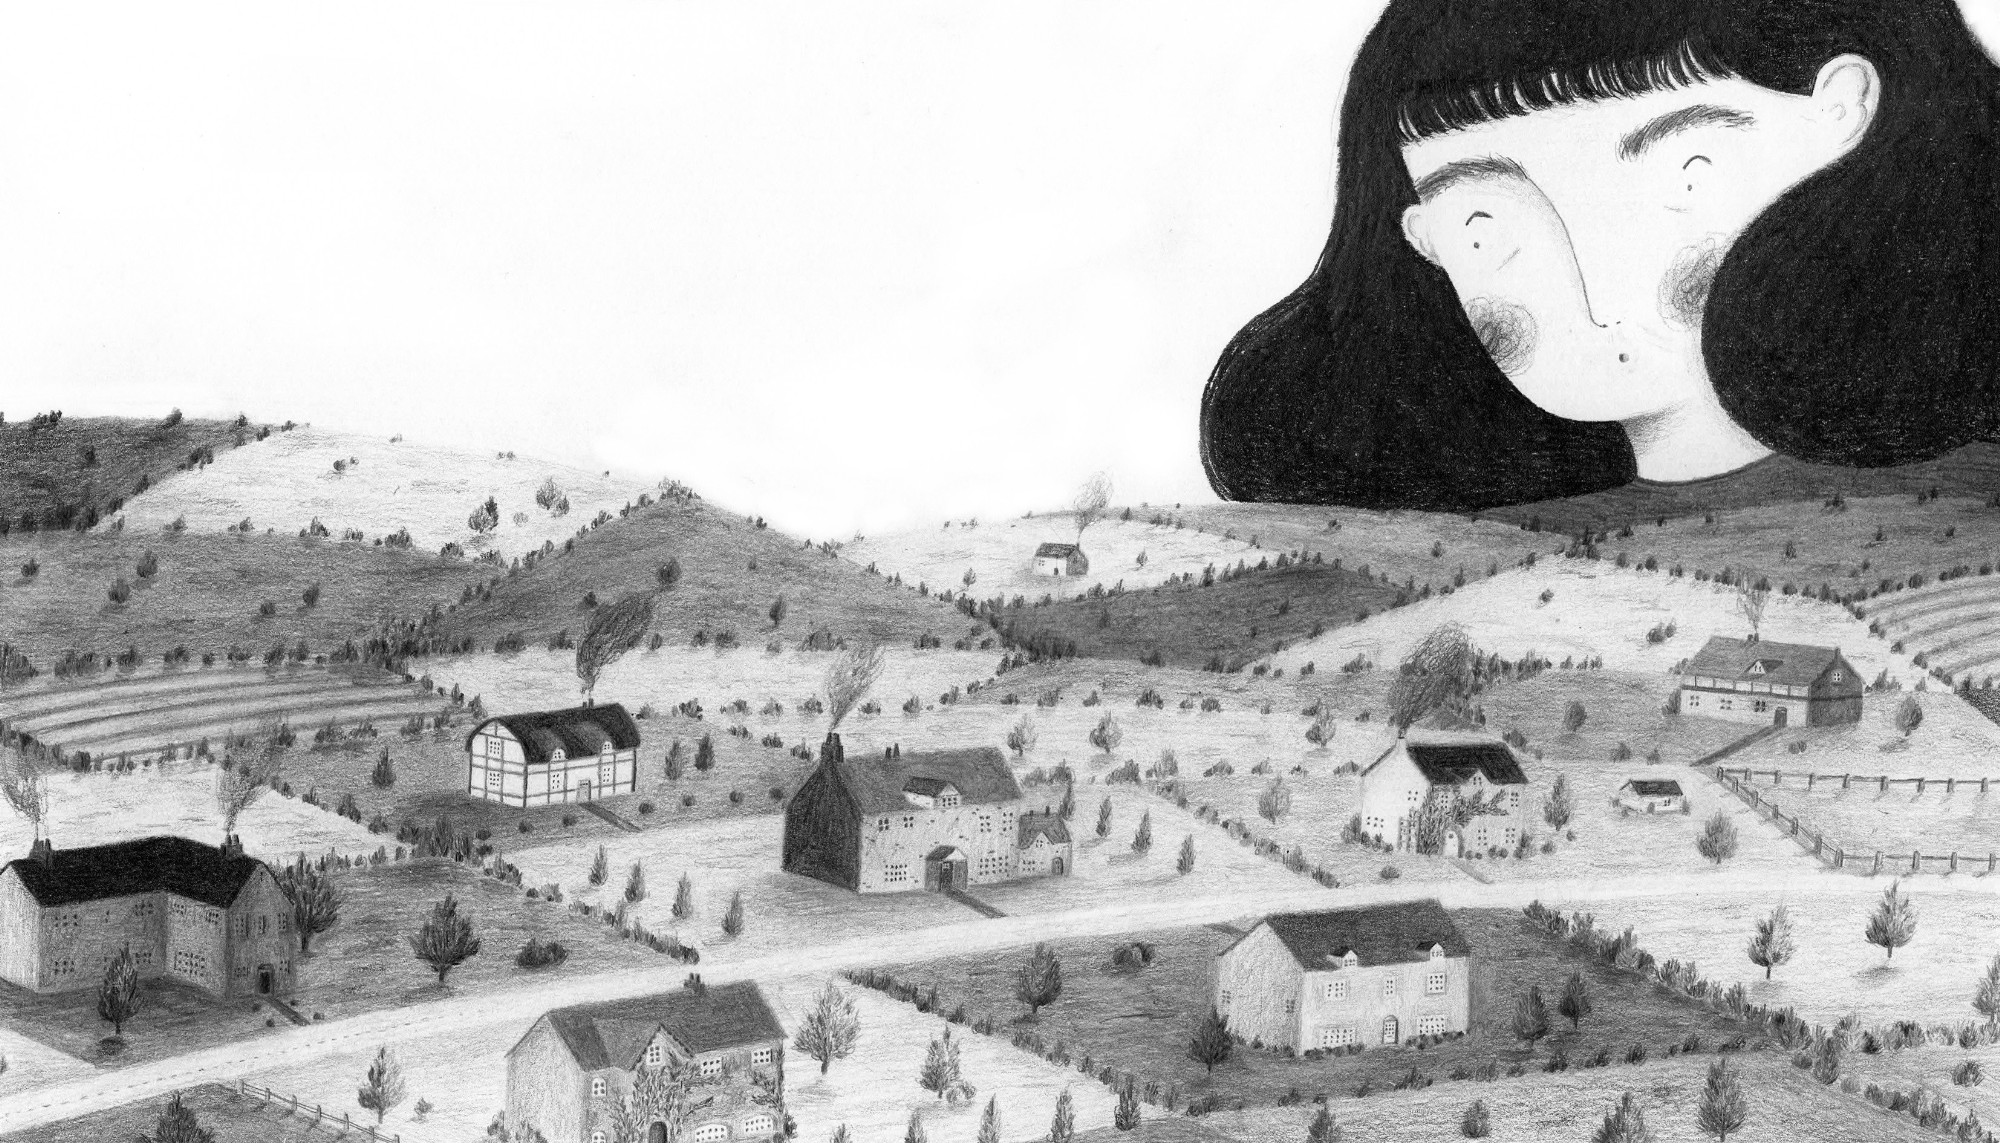 Illustration from book "The Map Woman" inspired by poem "The Map Woman" by Carol Ann Duffy. Kayleigh Keen.